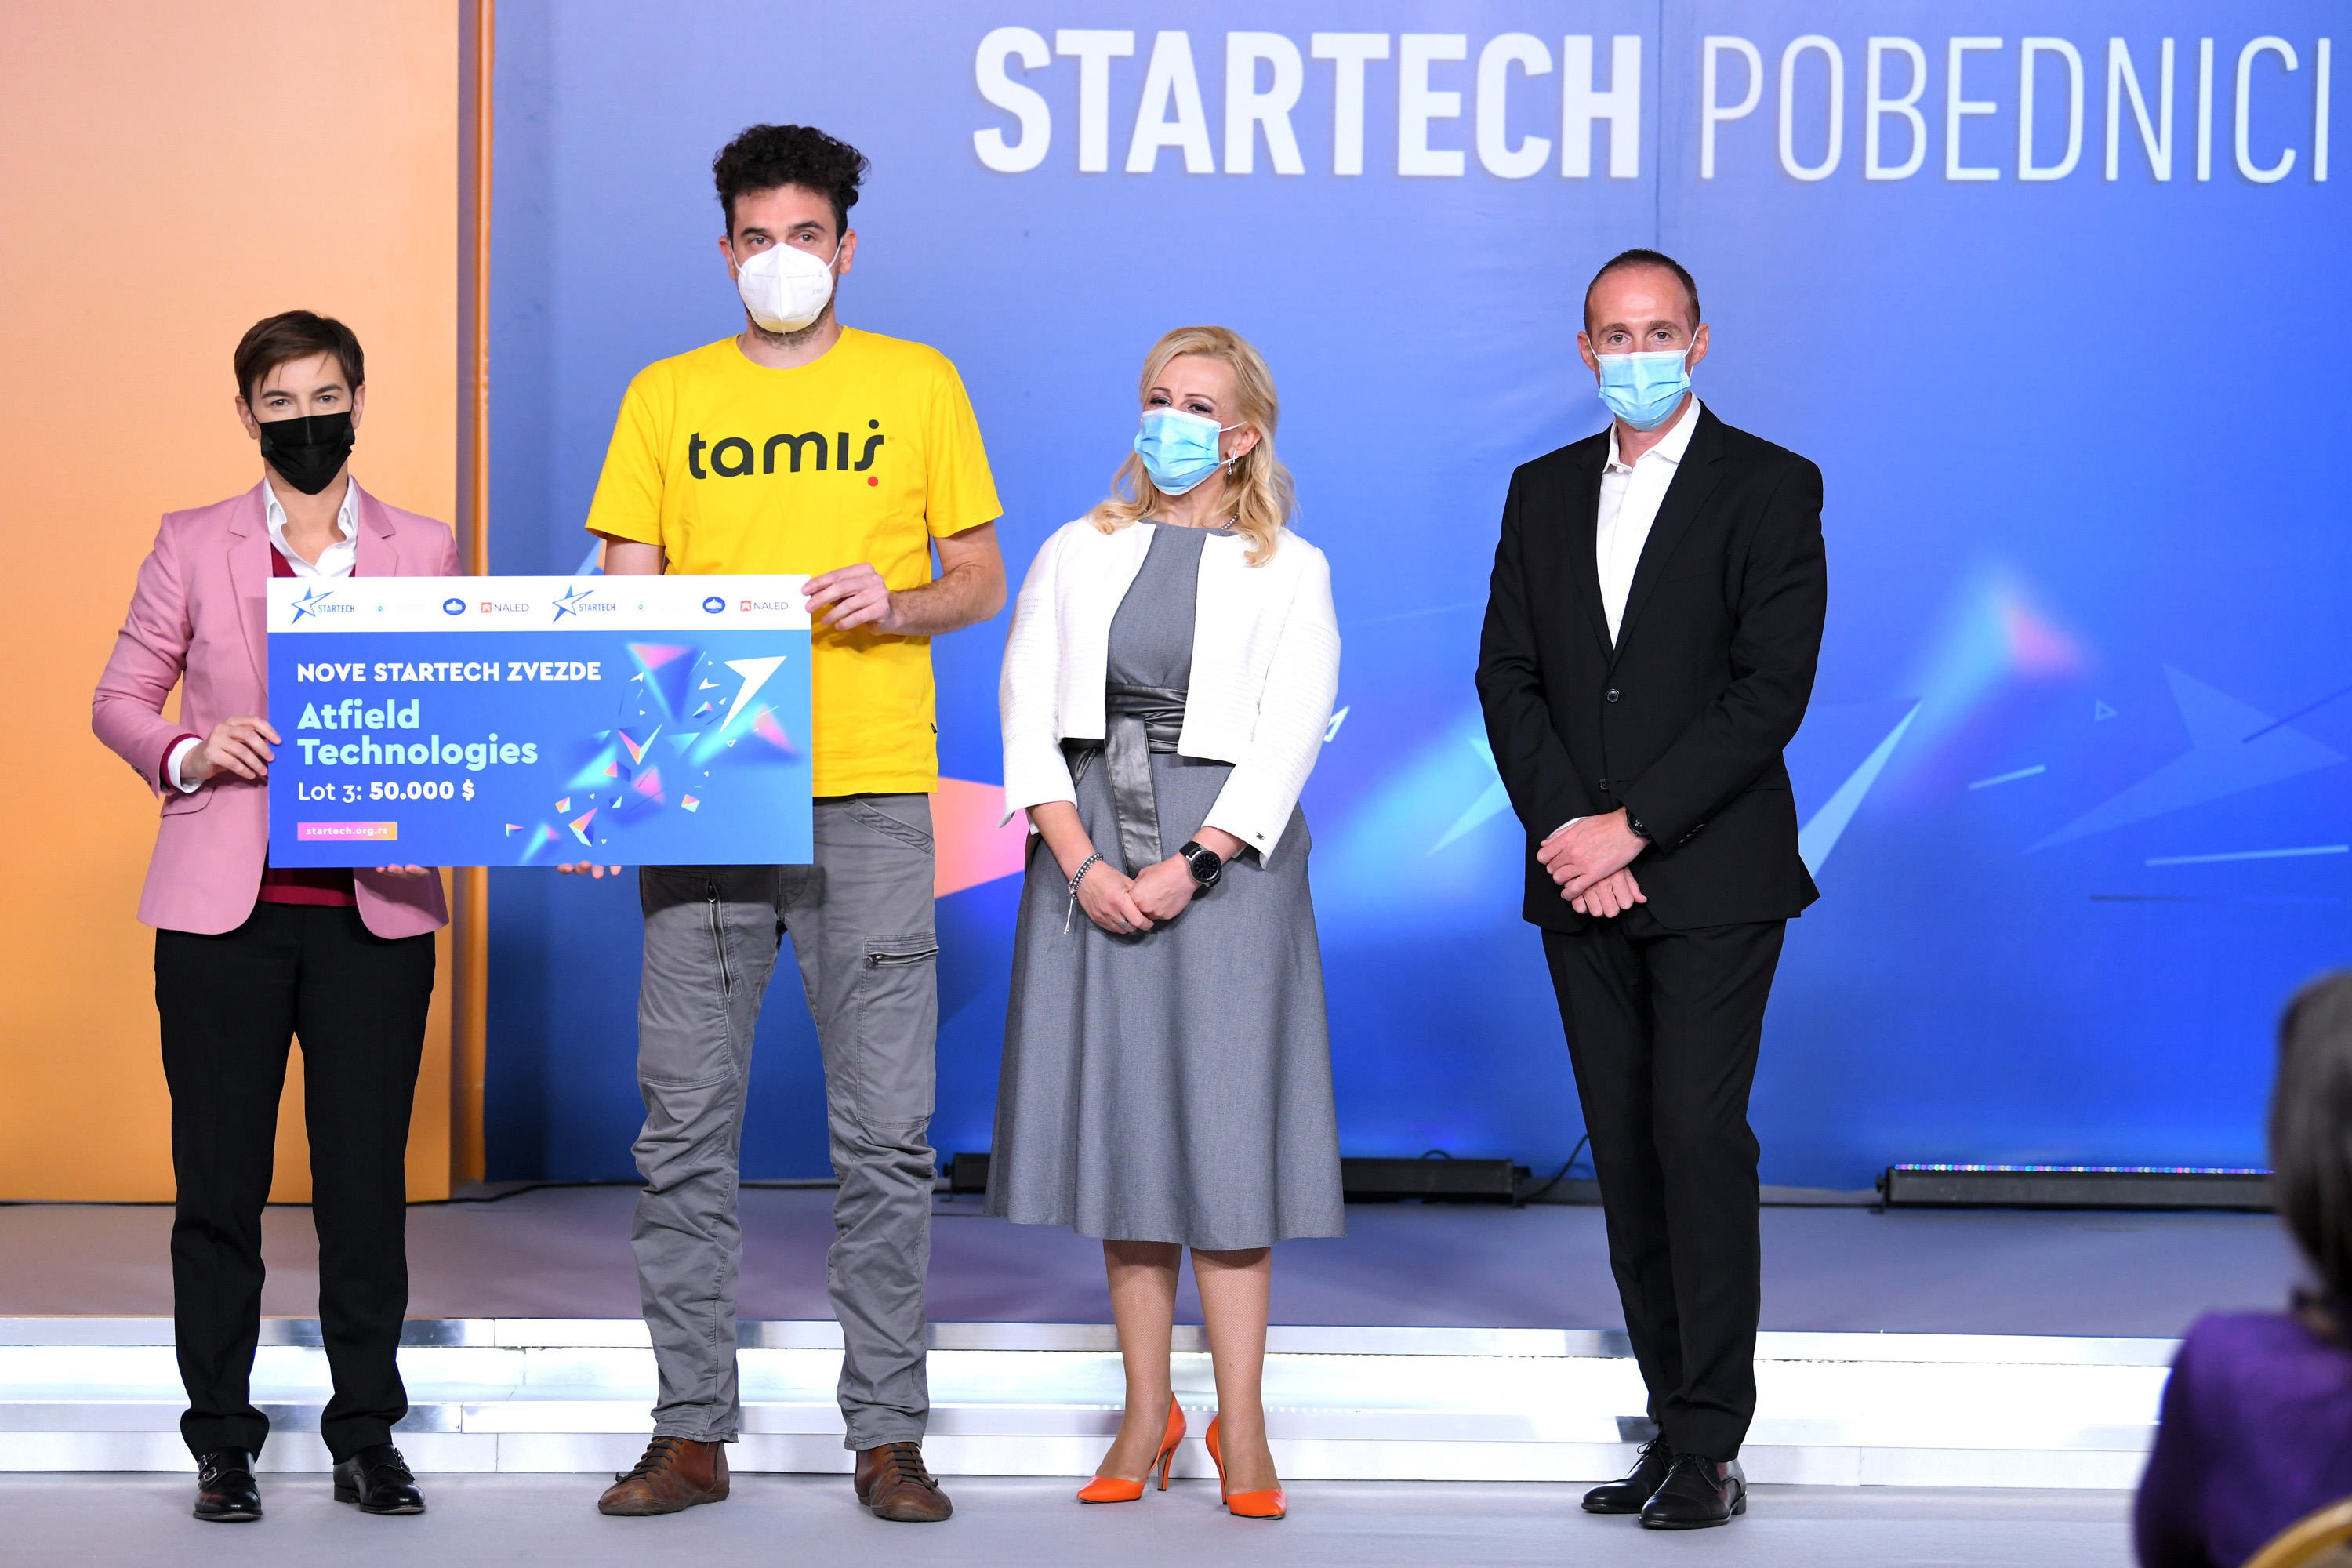 The first StarTech stars announced - 29 teams and companies receive a million dollars for investments